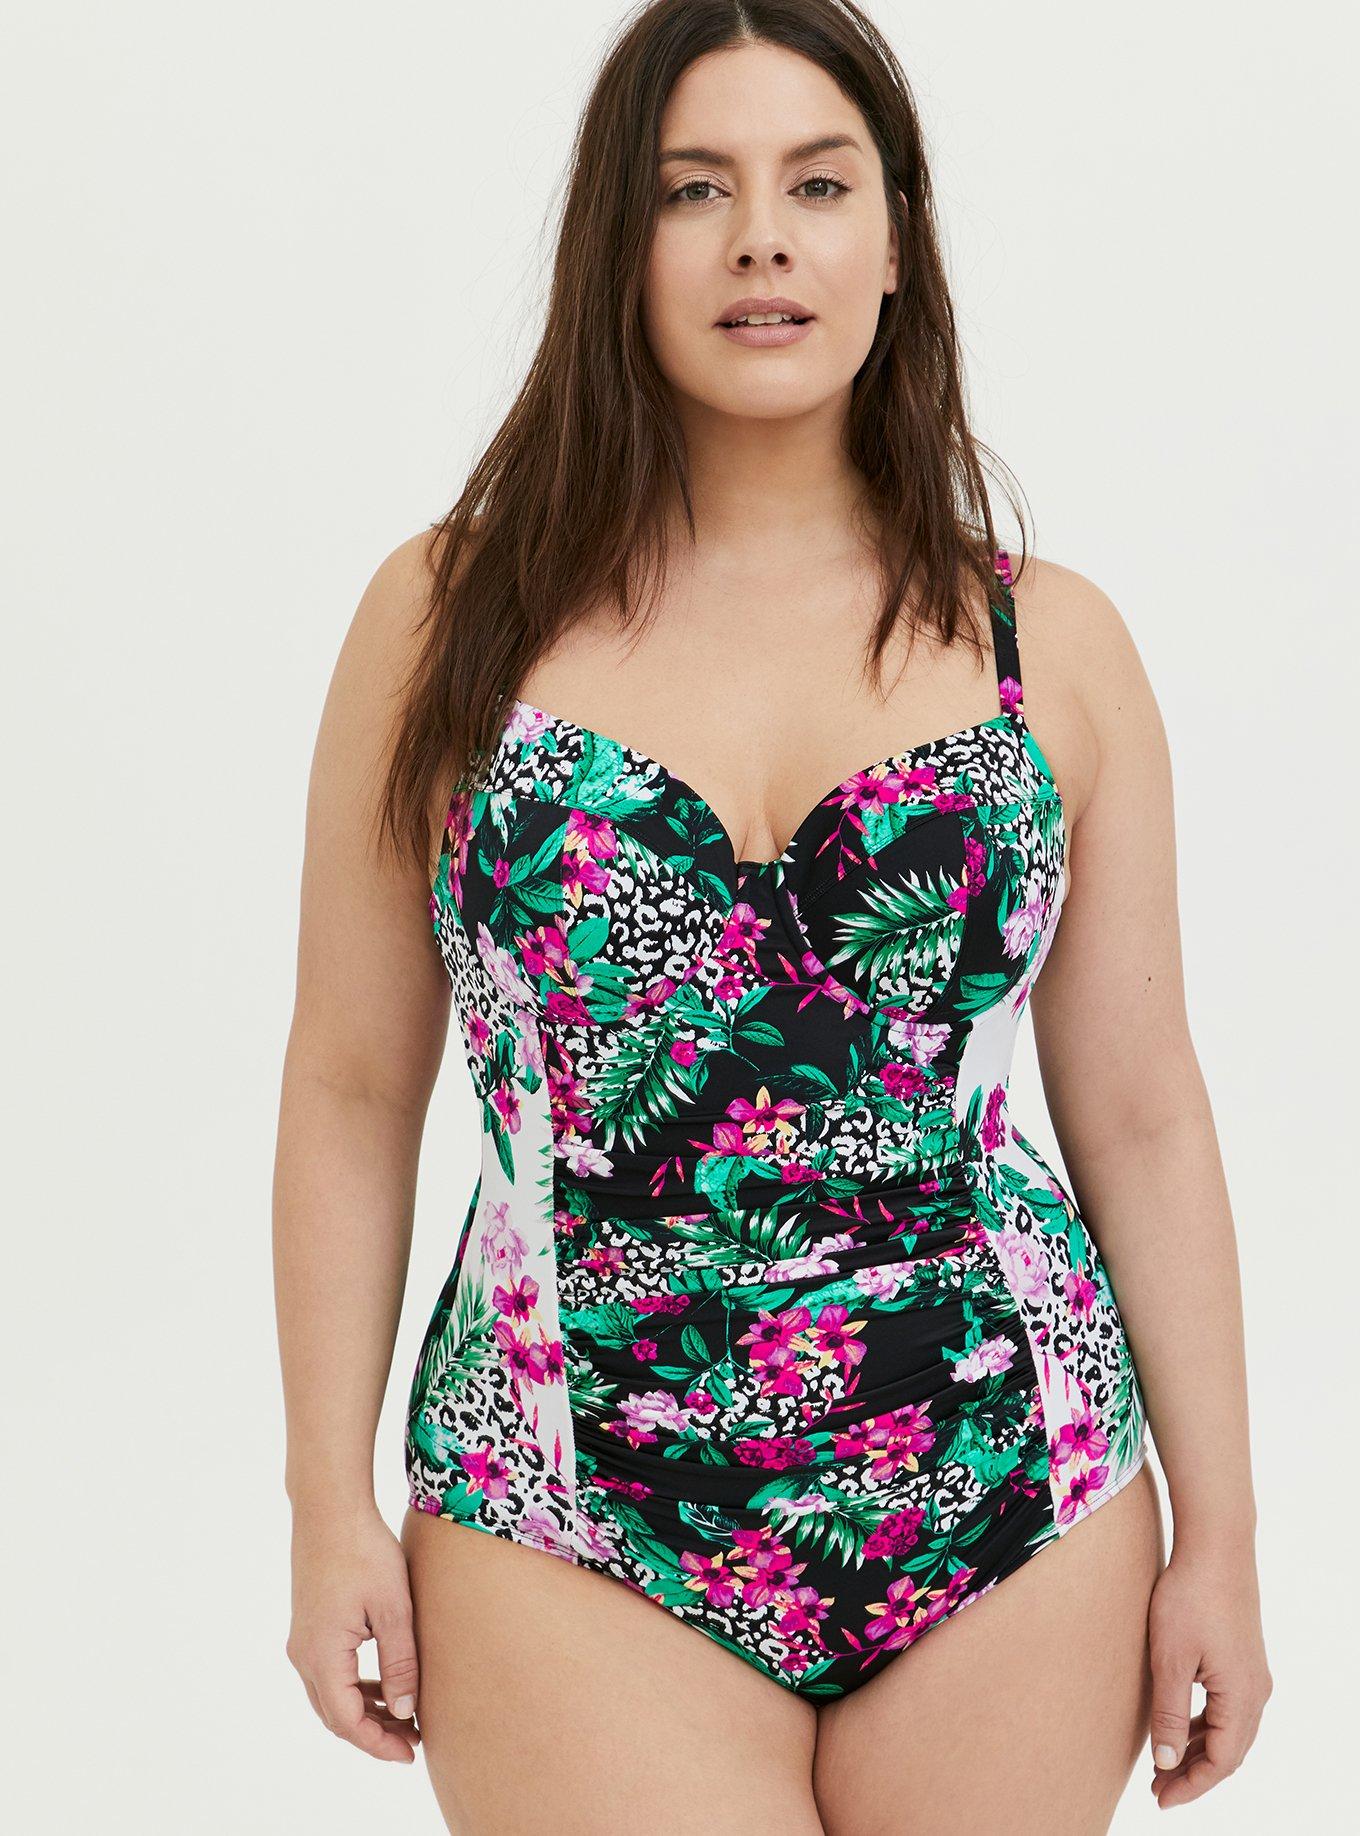 Swimsuits For All Women's Plus Size Ruched Underwire One Piece Swimsuit 14  Hawaiian Tropical